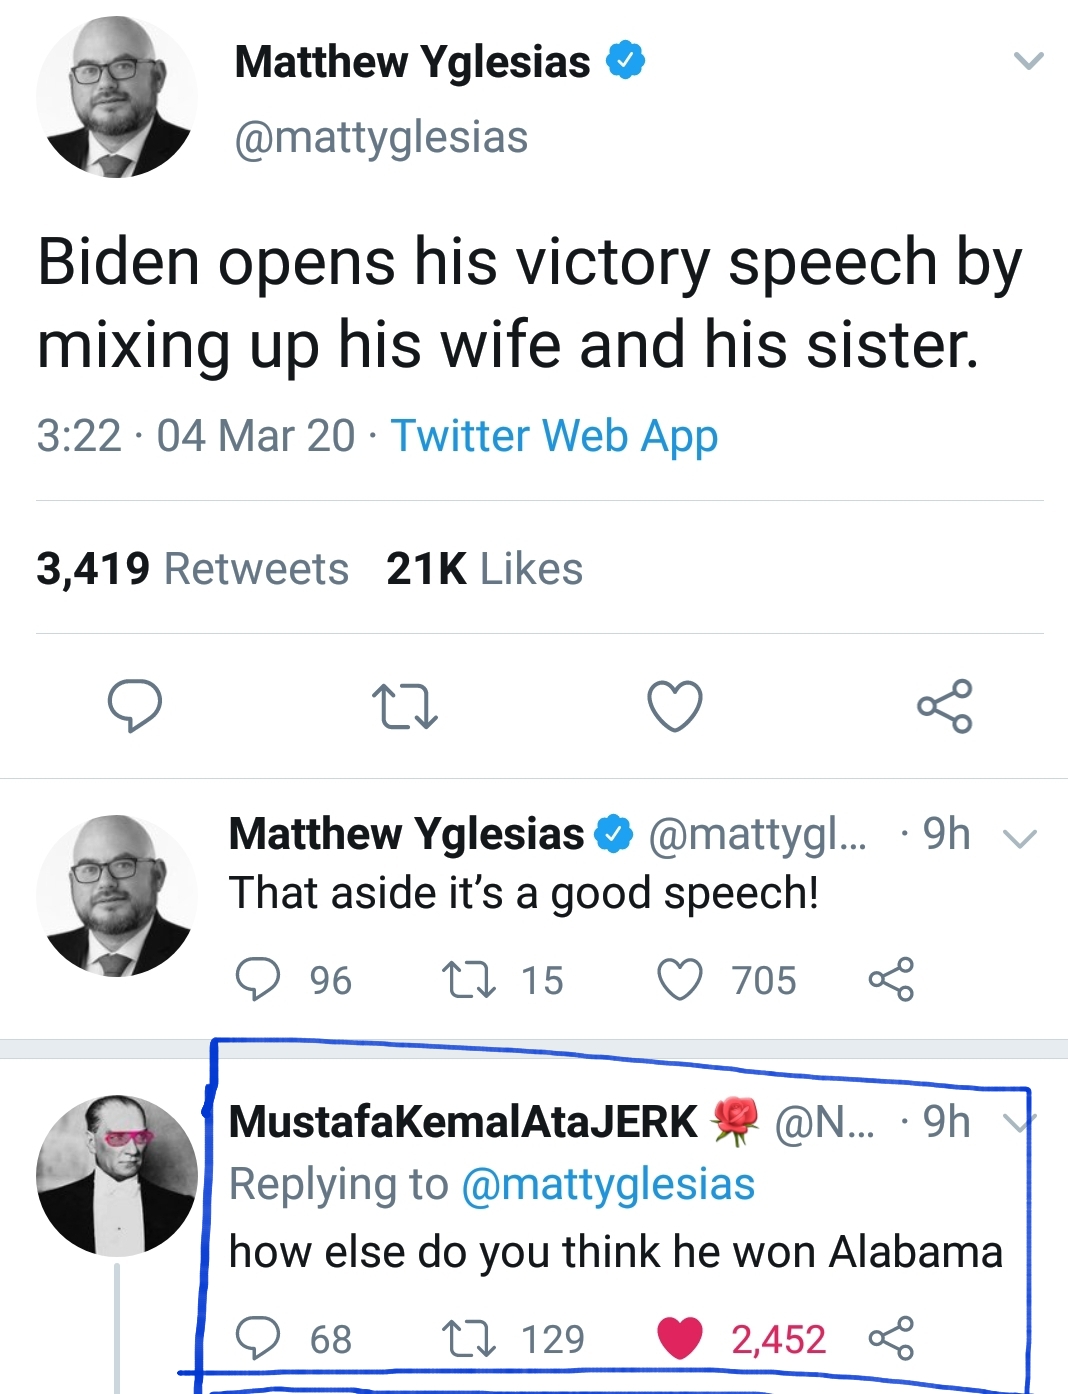 number - Matthew Yglesias Biden opens his victory speech by mixing up his wife and his sister. . 04 Mar 20 Twitter Web App 3,419 21K 9 Matthew Yglesias ....9h That aside it's a good speech! 96 2 15 705 MustafakemalAta Jerk ....9h how else do you think he 